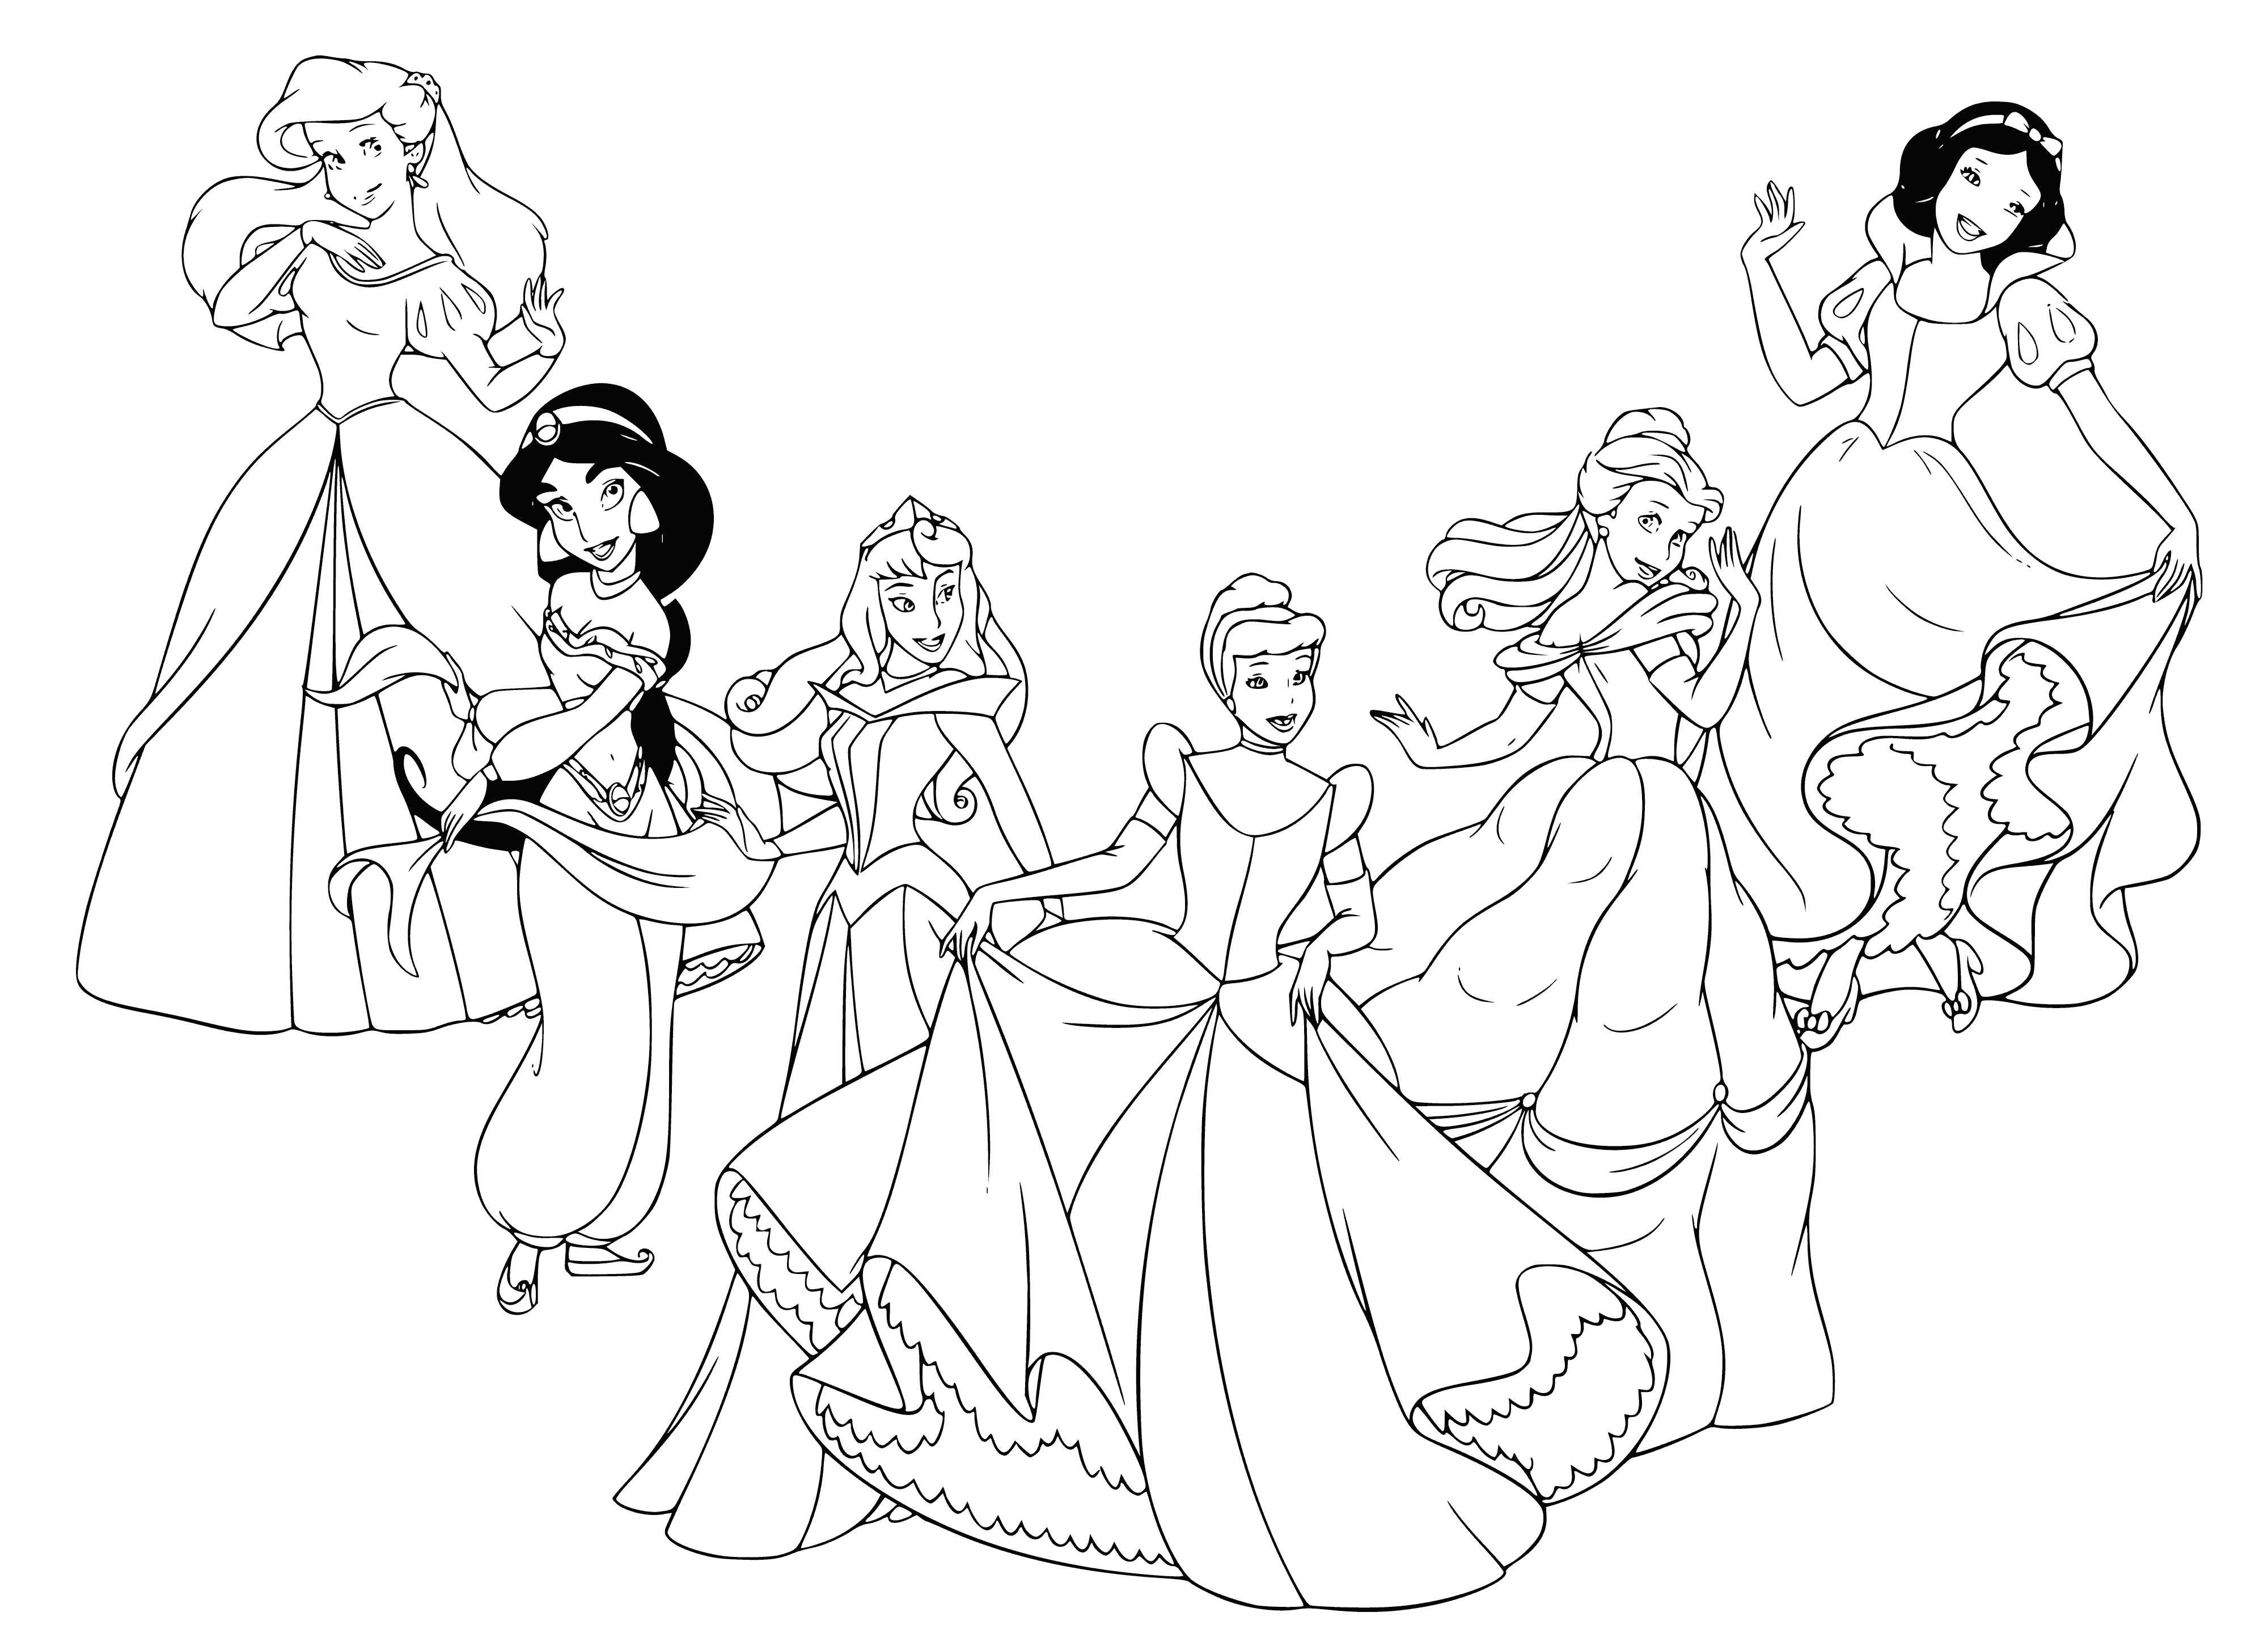 coloring page: Disney princesses smile/laugh together: each wears a pretty dress; with different hairstyles and colors - looking beautiful.